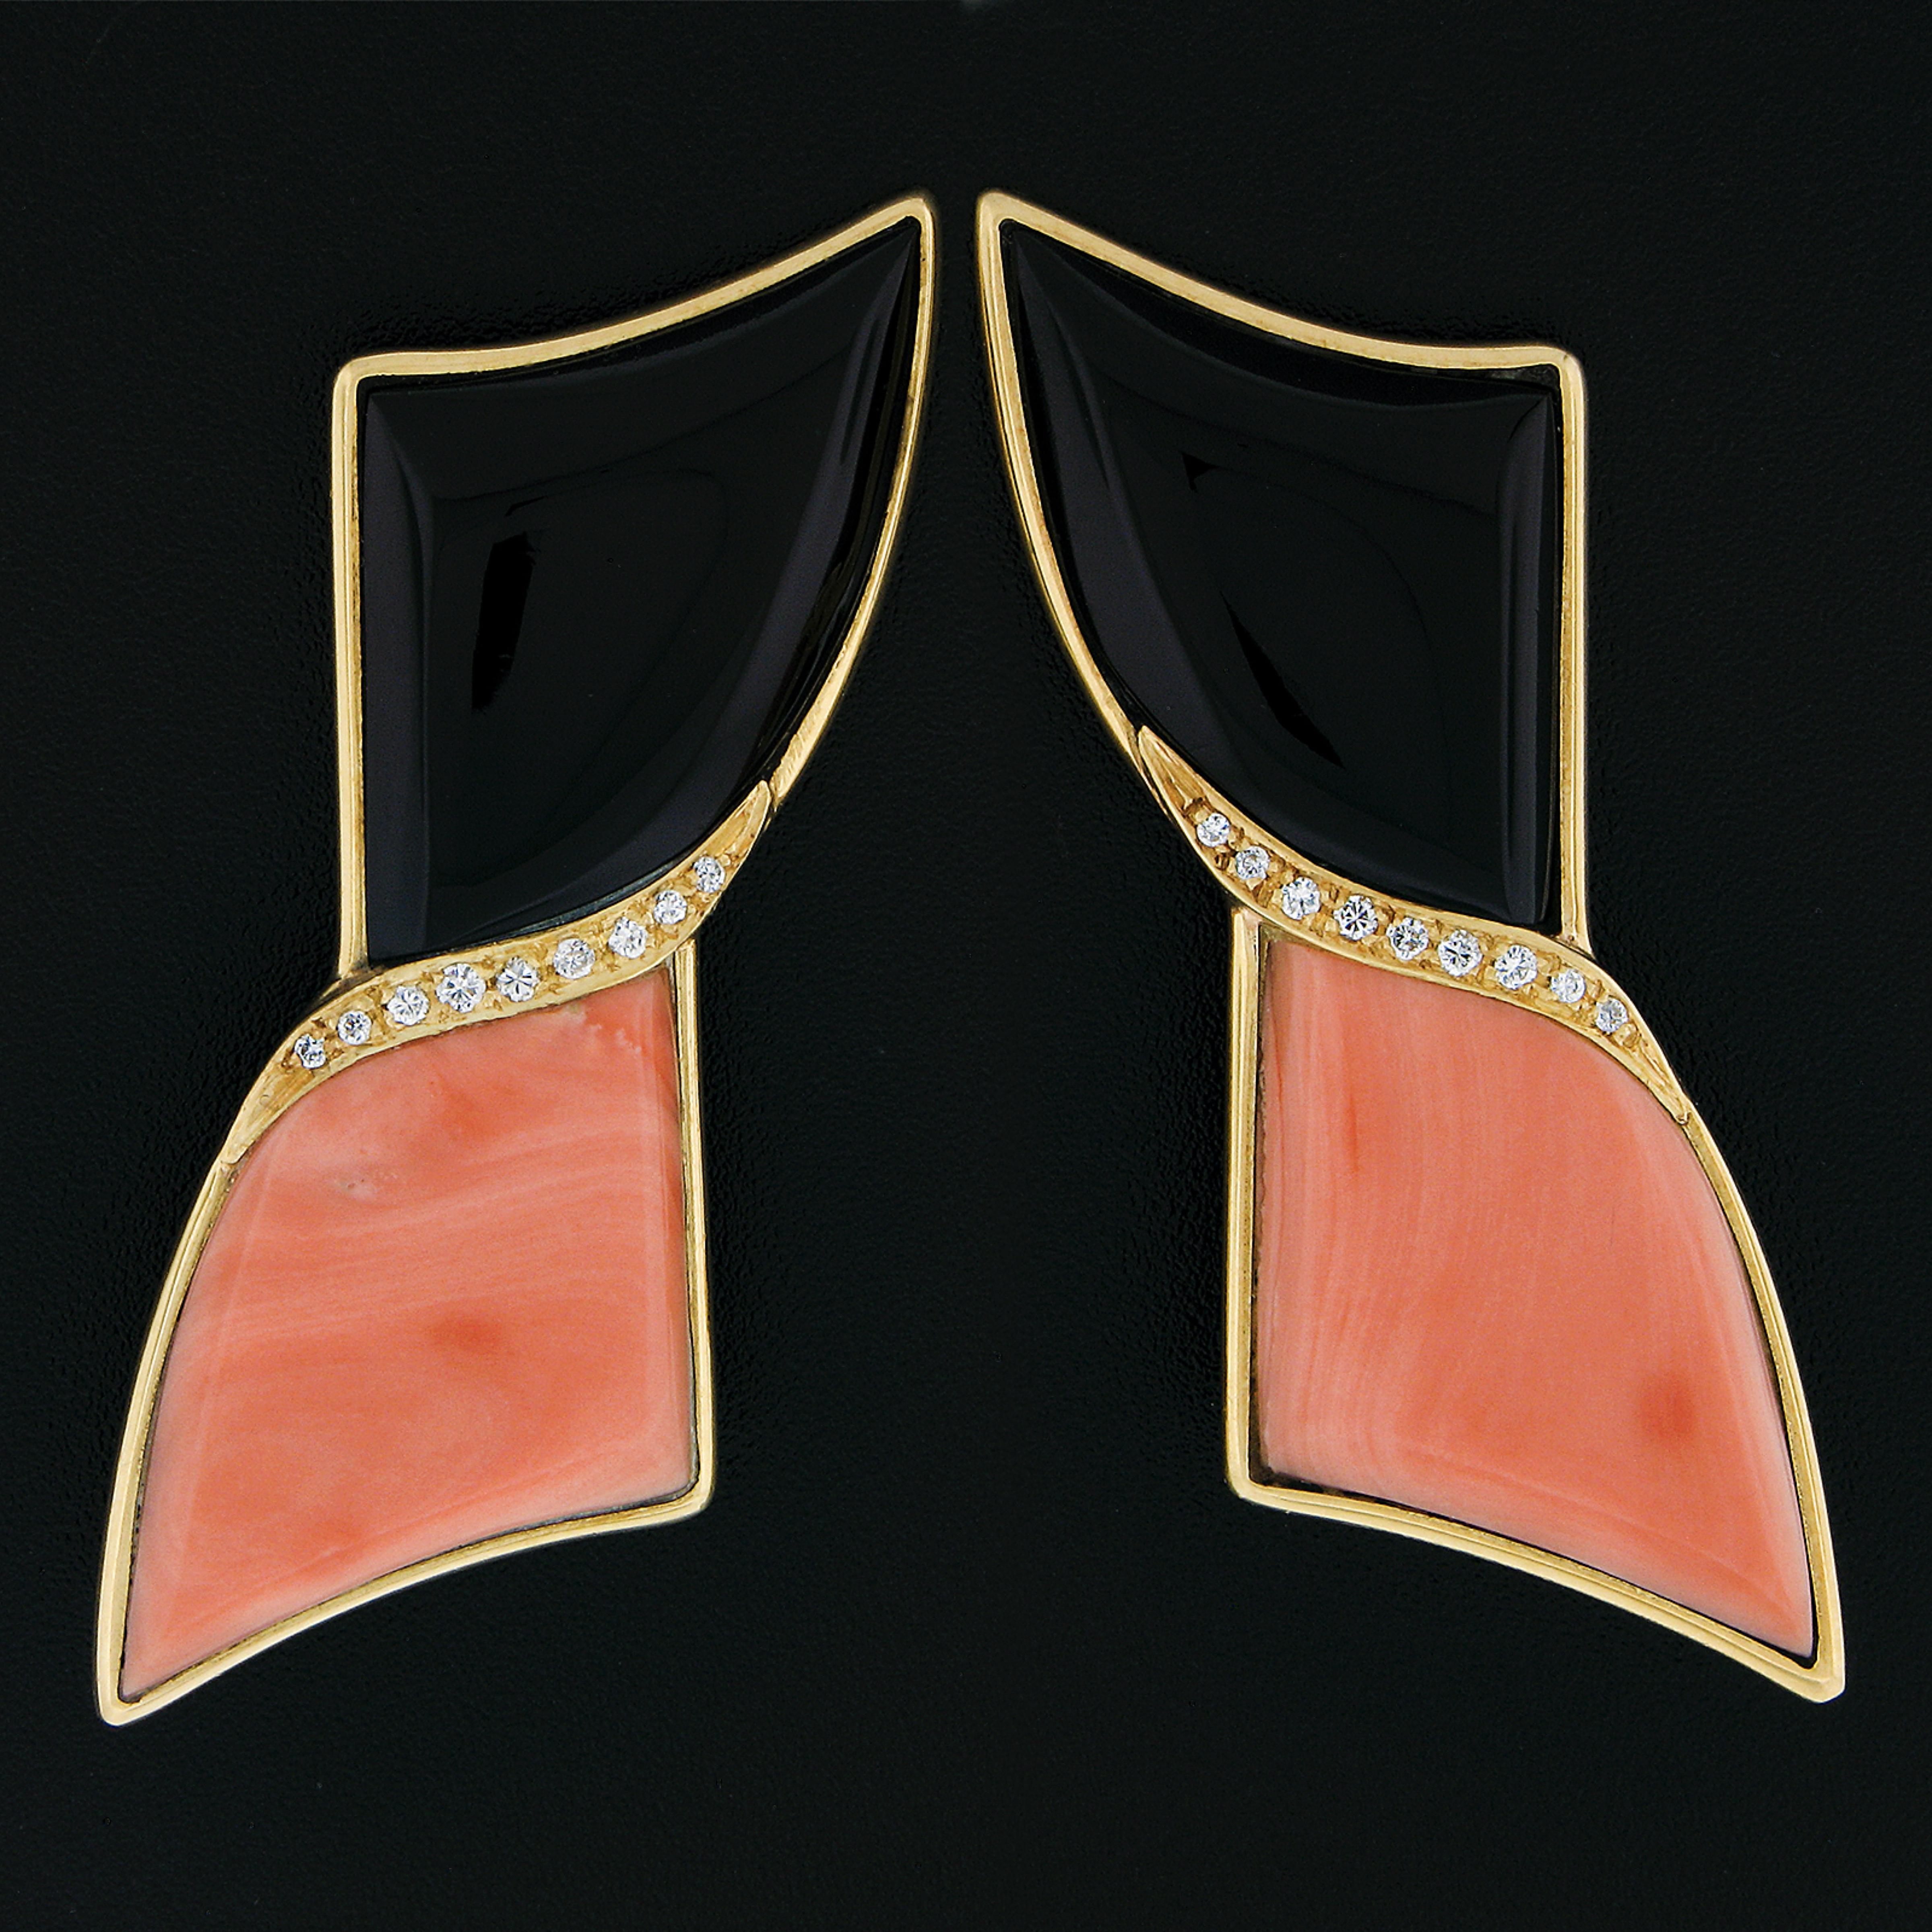 Here we have a large and outstanding pair of vintage statement earrings that are crafted in solid 18k yellow gold and feature natural black onyx and coral stones adorned with fine quality diamond accents. The custom cut black onyx and coral stones